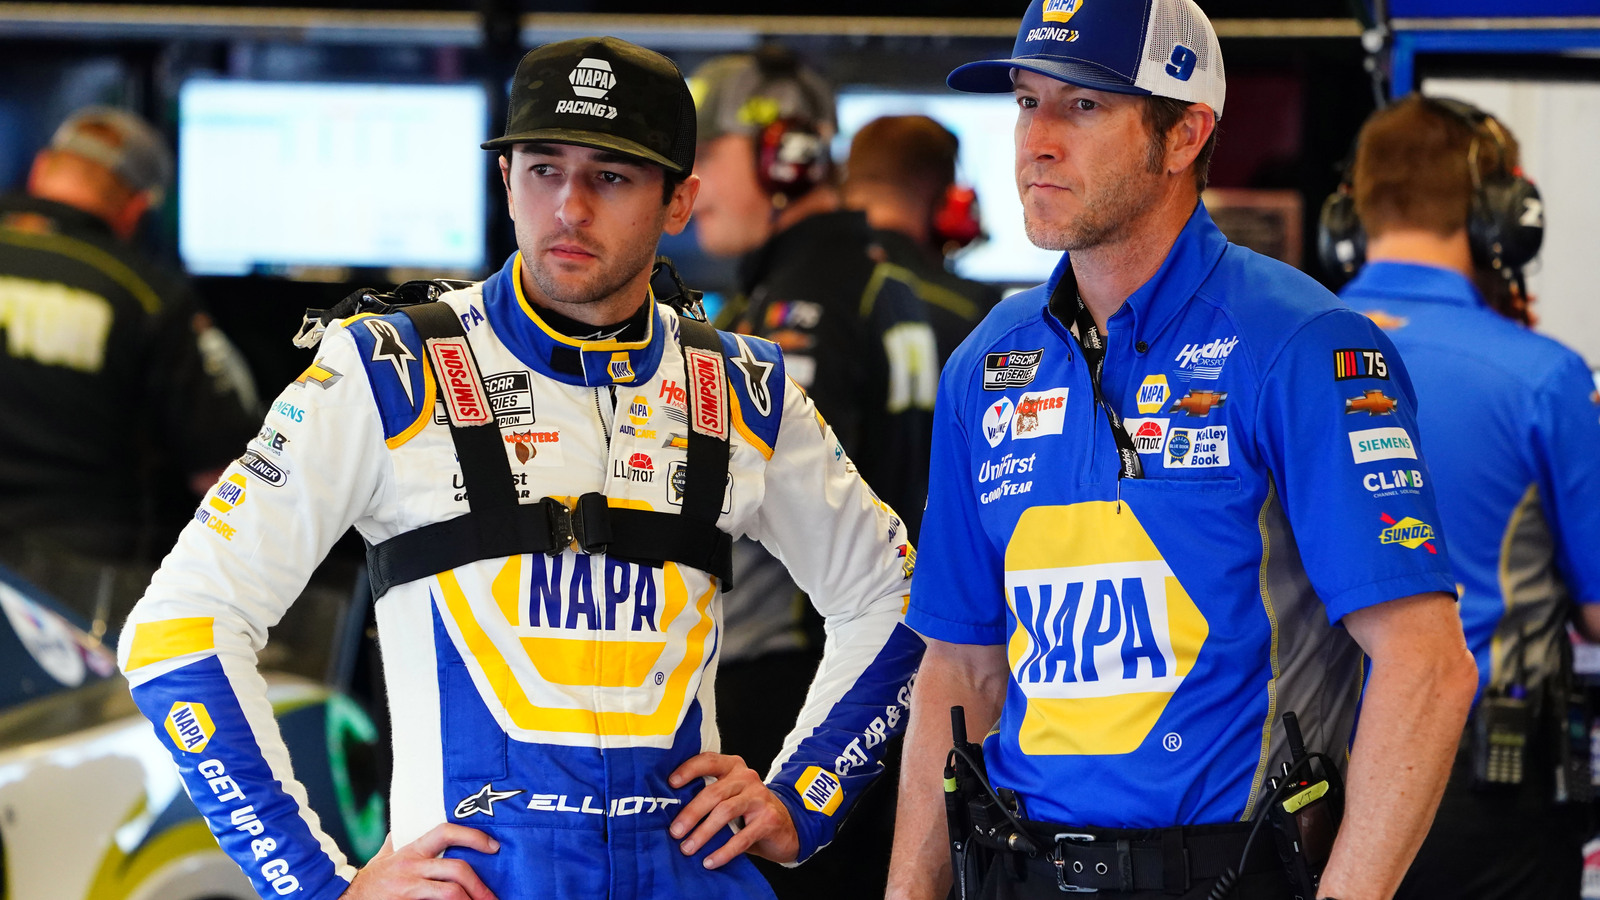 Alan Gustafson to call 650th Cup event as crew chief at Talladega